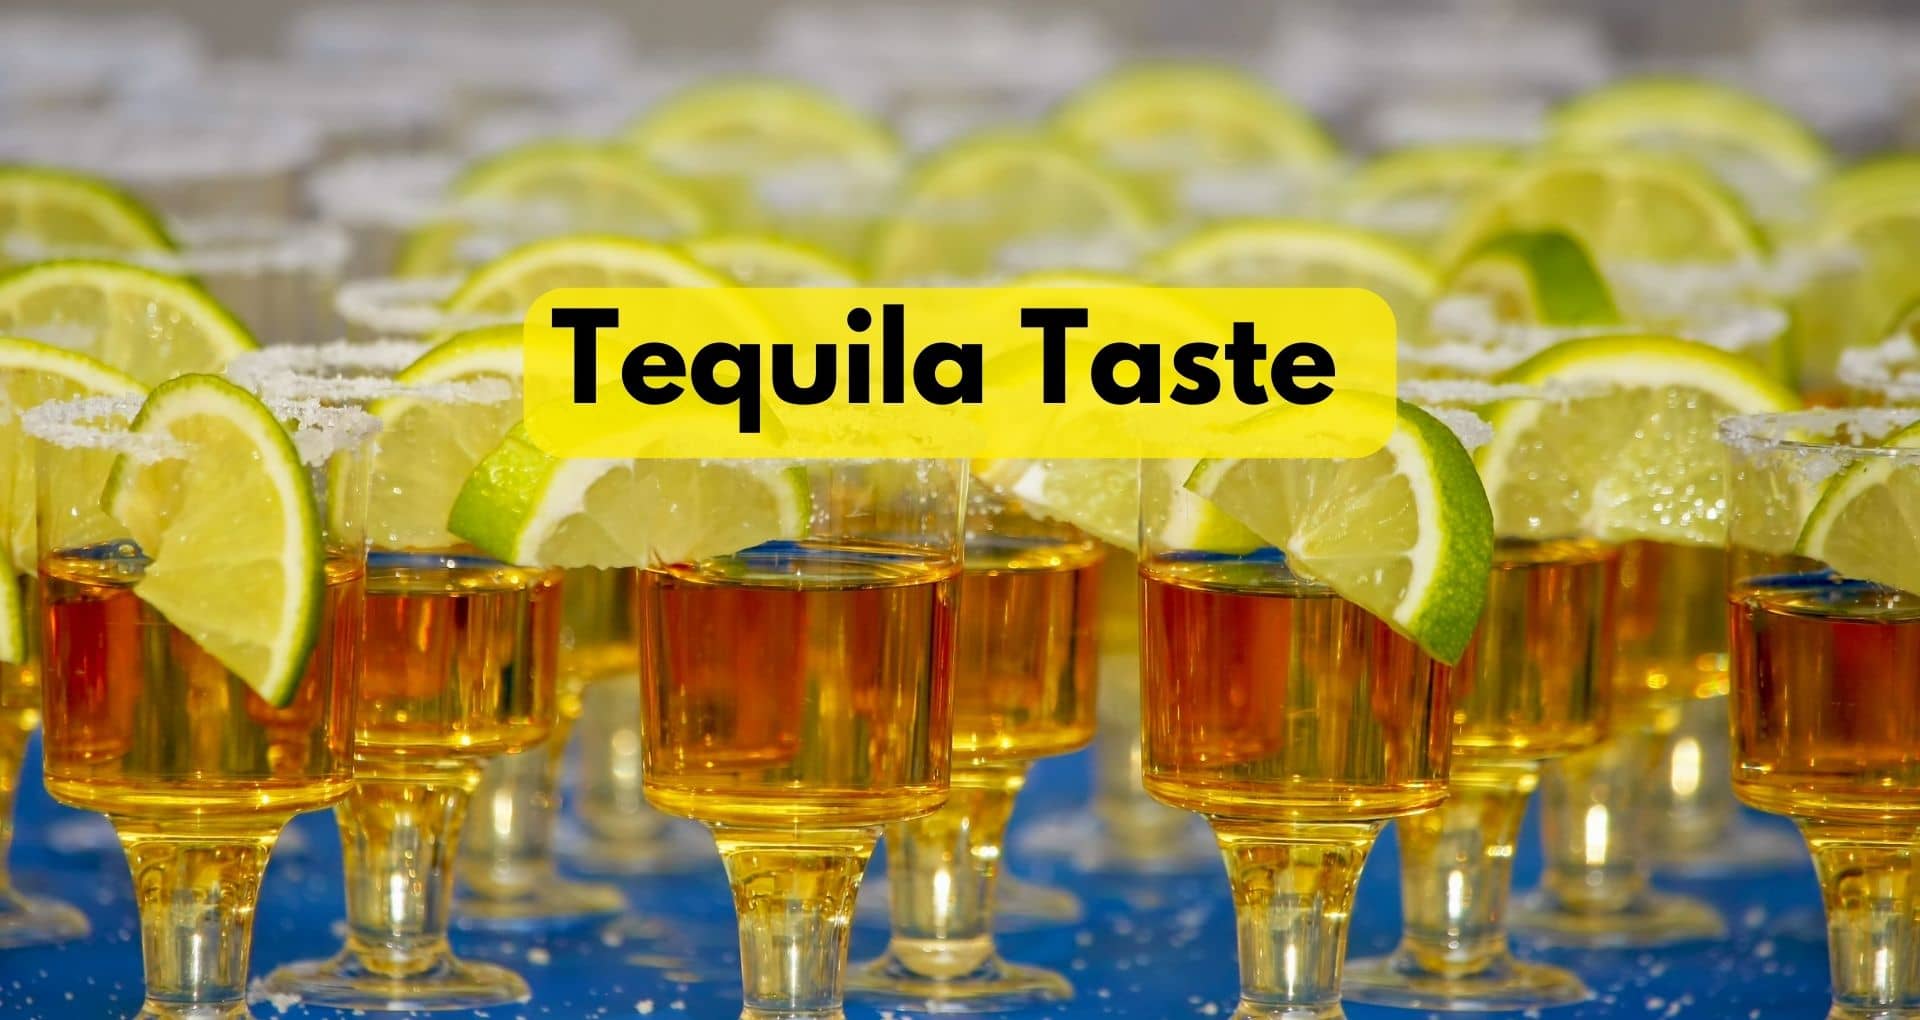 What Does Tequila Taste Like?